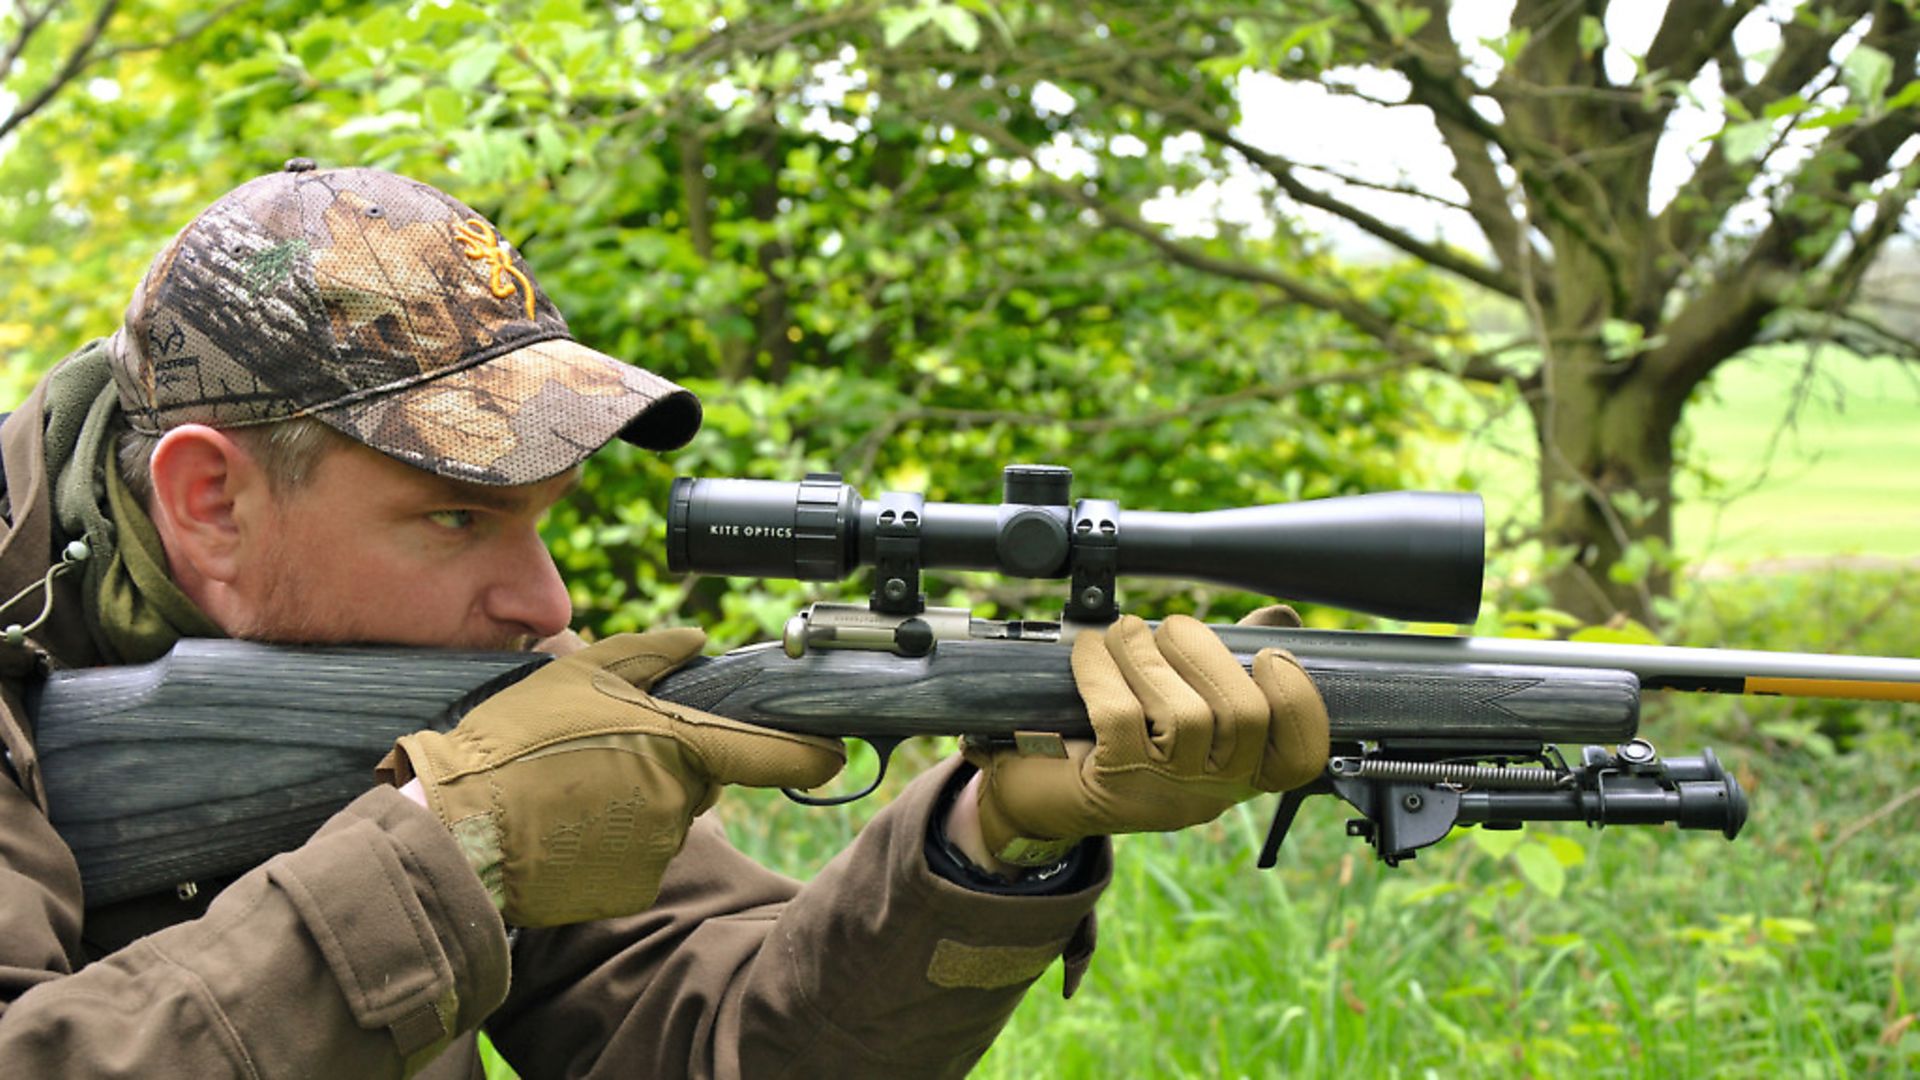 Browning T-Bolt Target Varmint Stainless in .17HMR - test & review